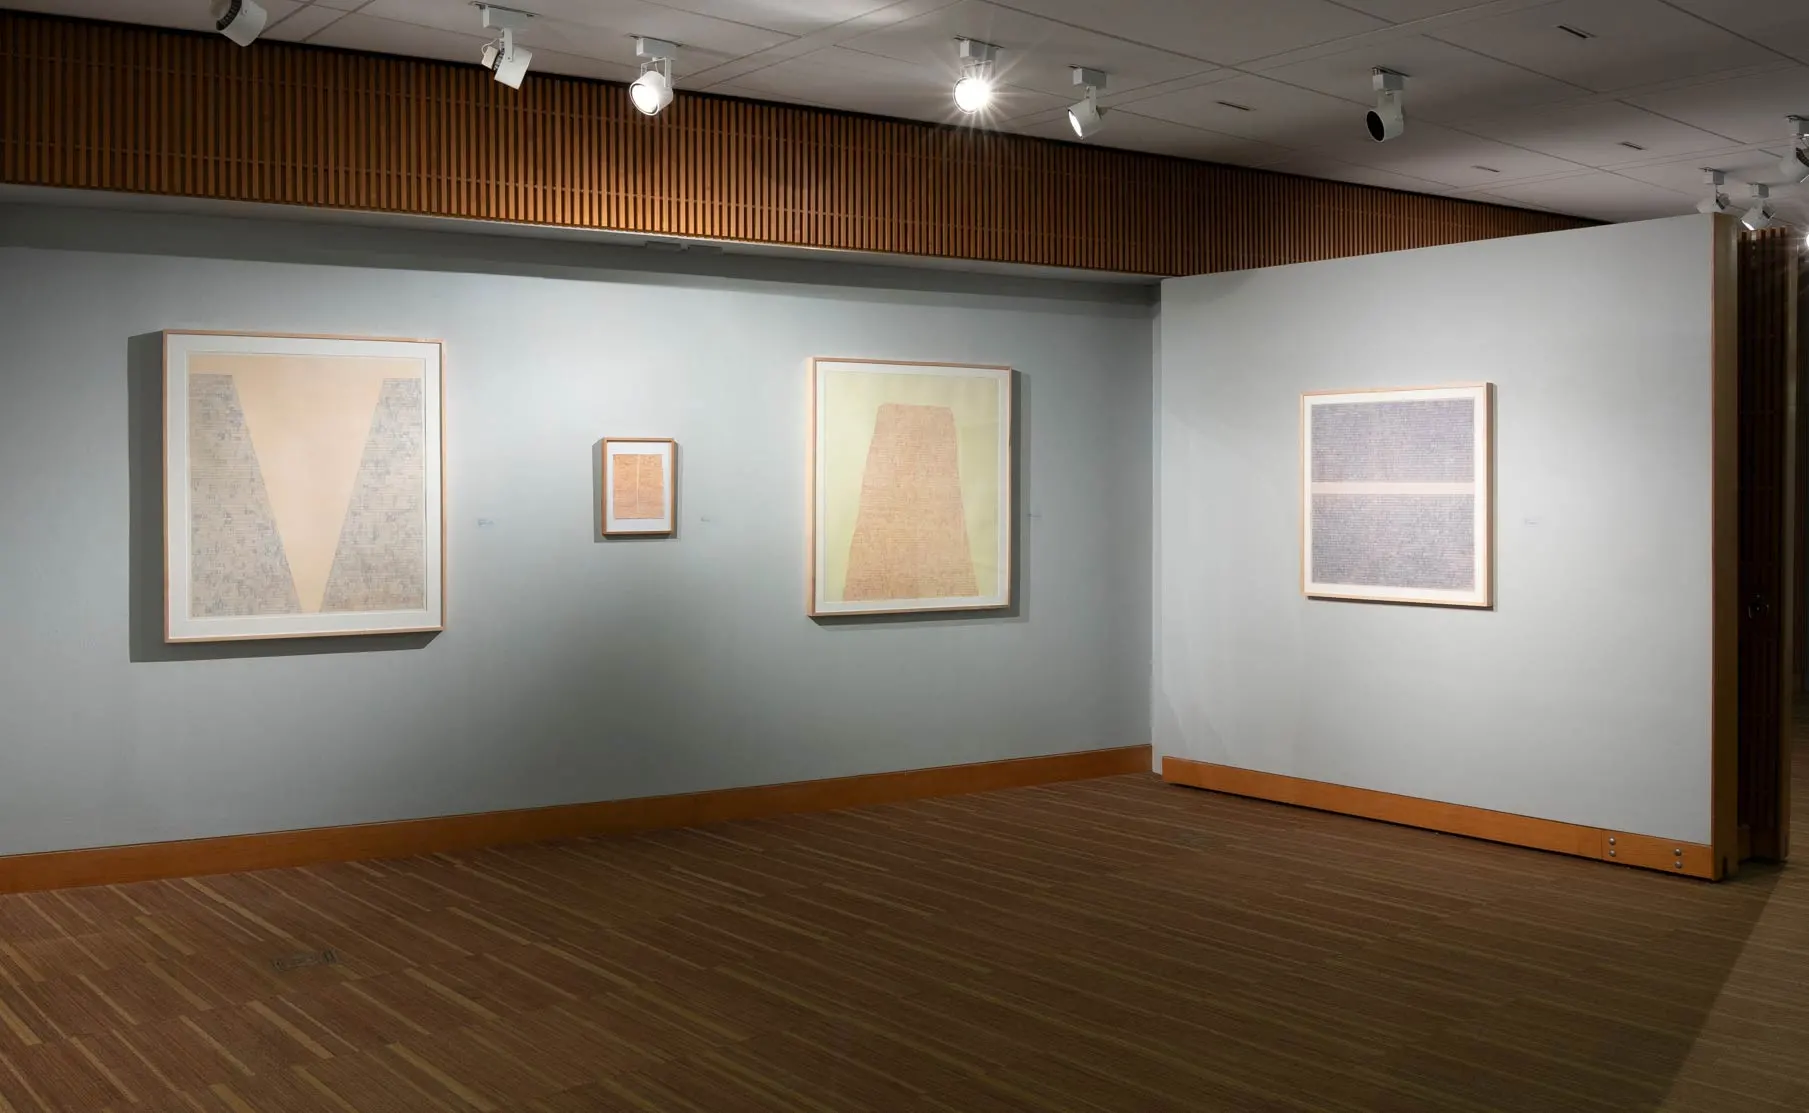 install view of "Samantha Mitchell: Land Forms", Rosedale Gallery, University Commons, photo: Sam Fritch